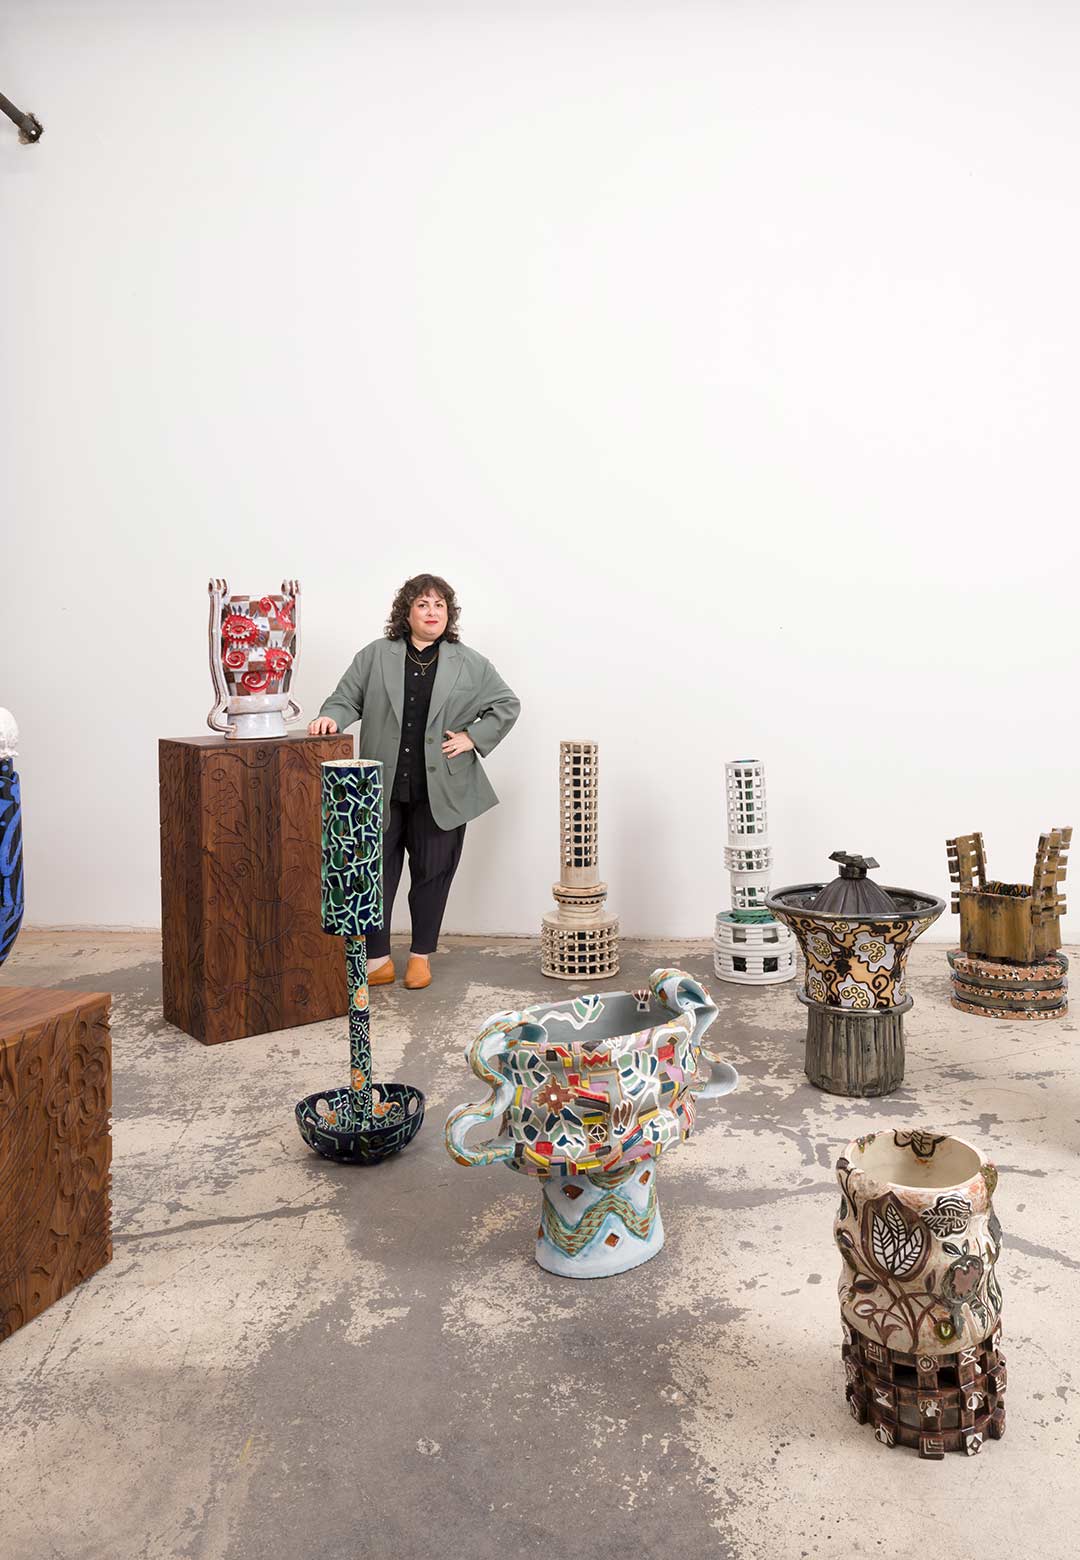 Ceramicist Bari Ziperstein uses historicity and craftsmanship to create 'Fantasy Pieces'